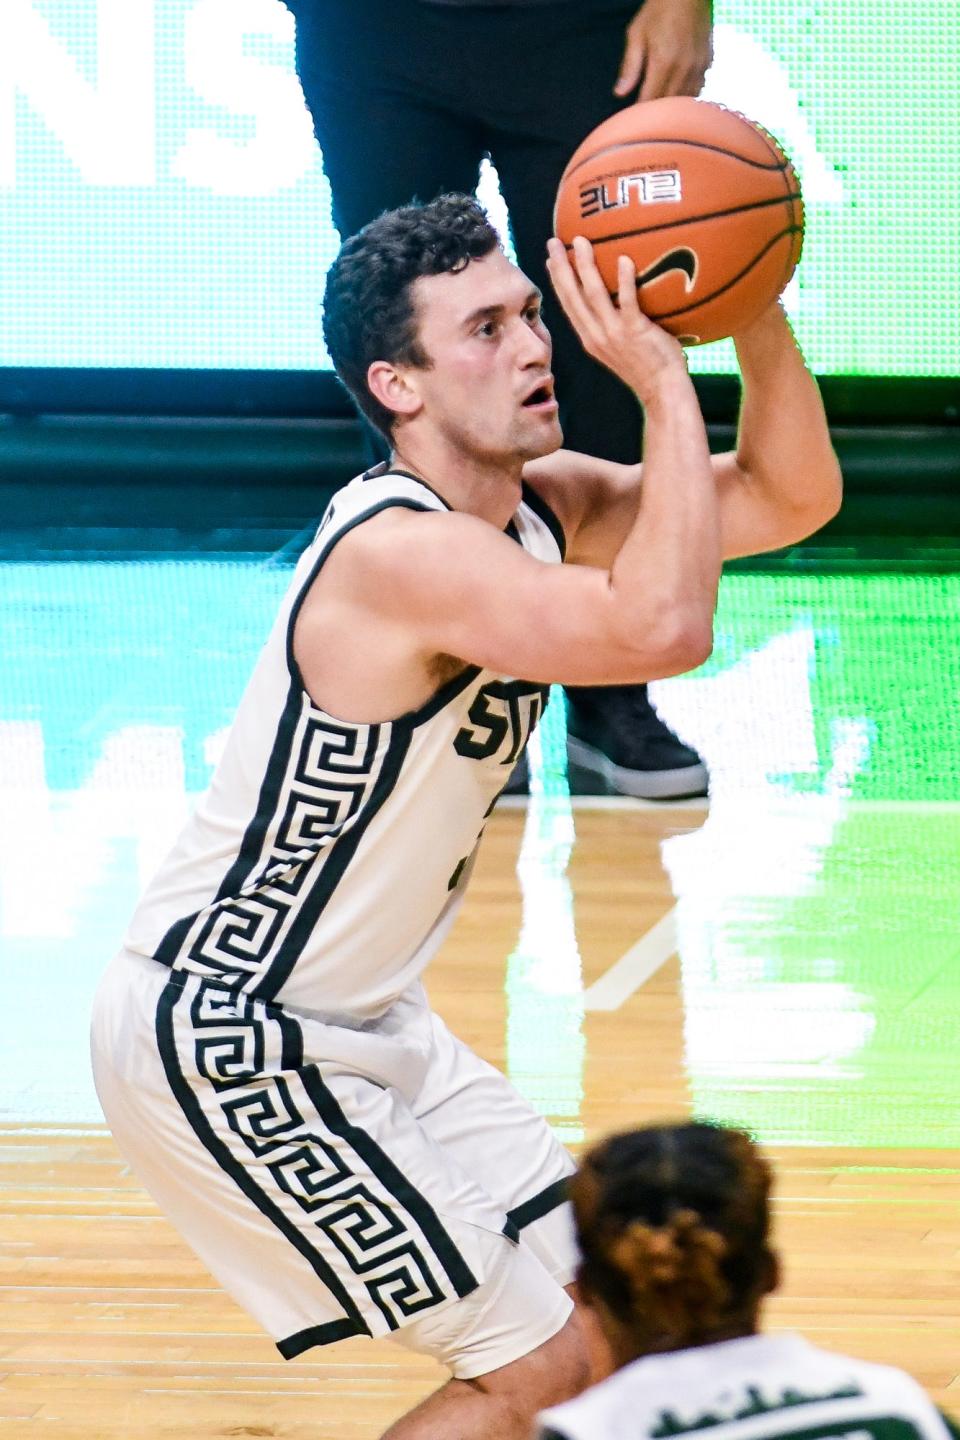 Michigan State's Foster Loyer makes a 3-pointer against Eastern Michigan's during the first half on Wednesday, Nov. 25, 2020, at the Breslin Center in East Lansing.